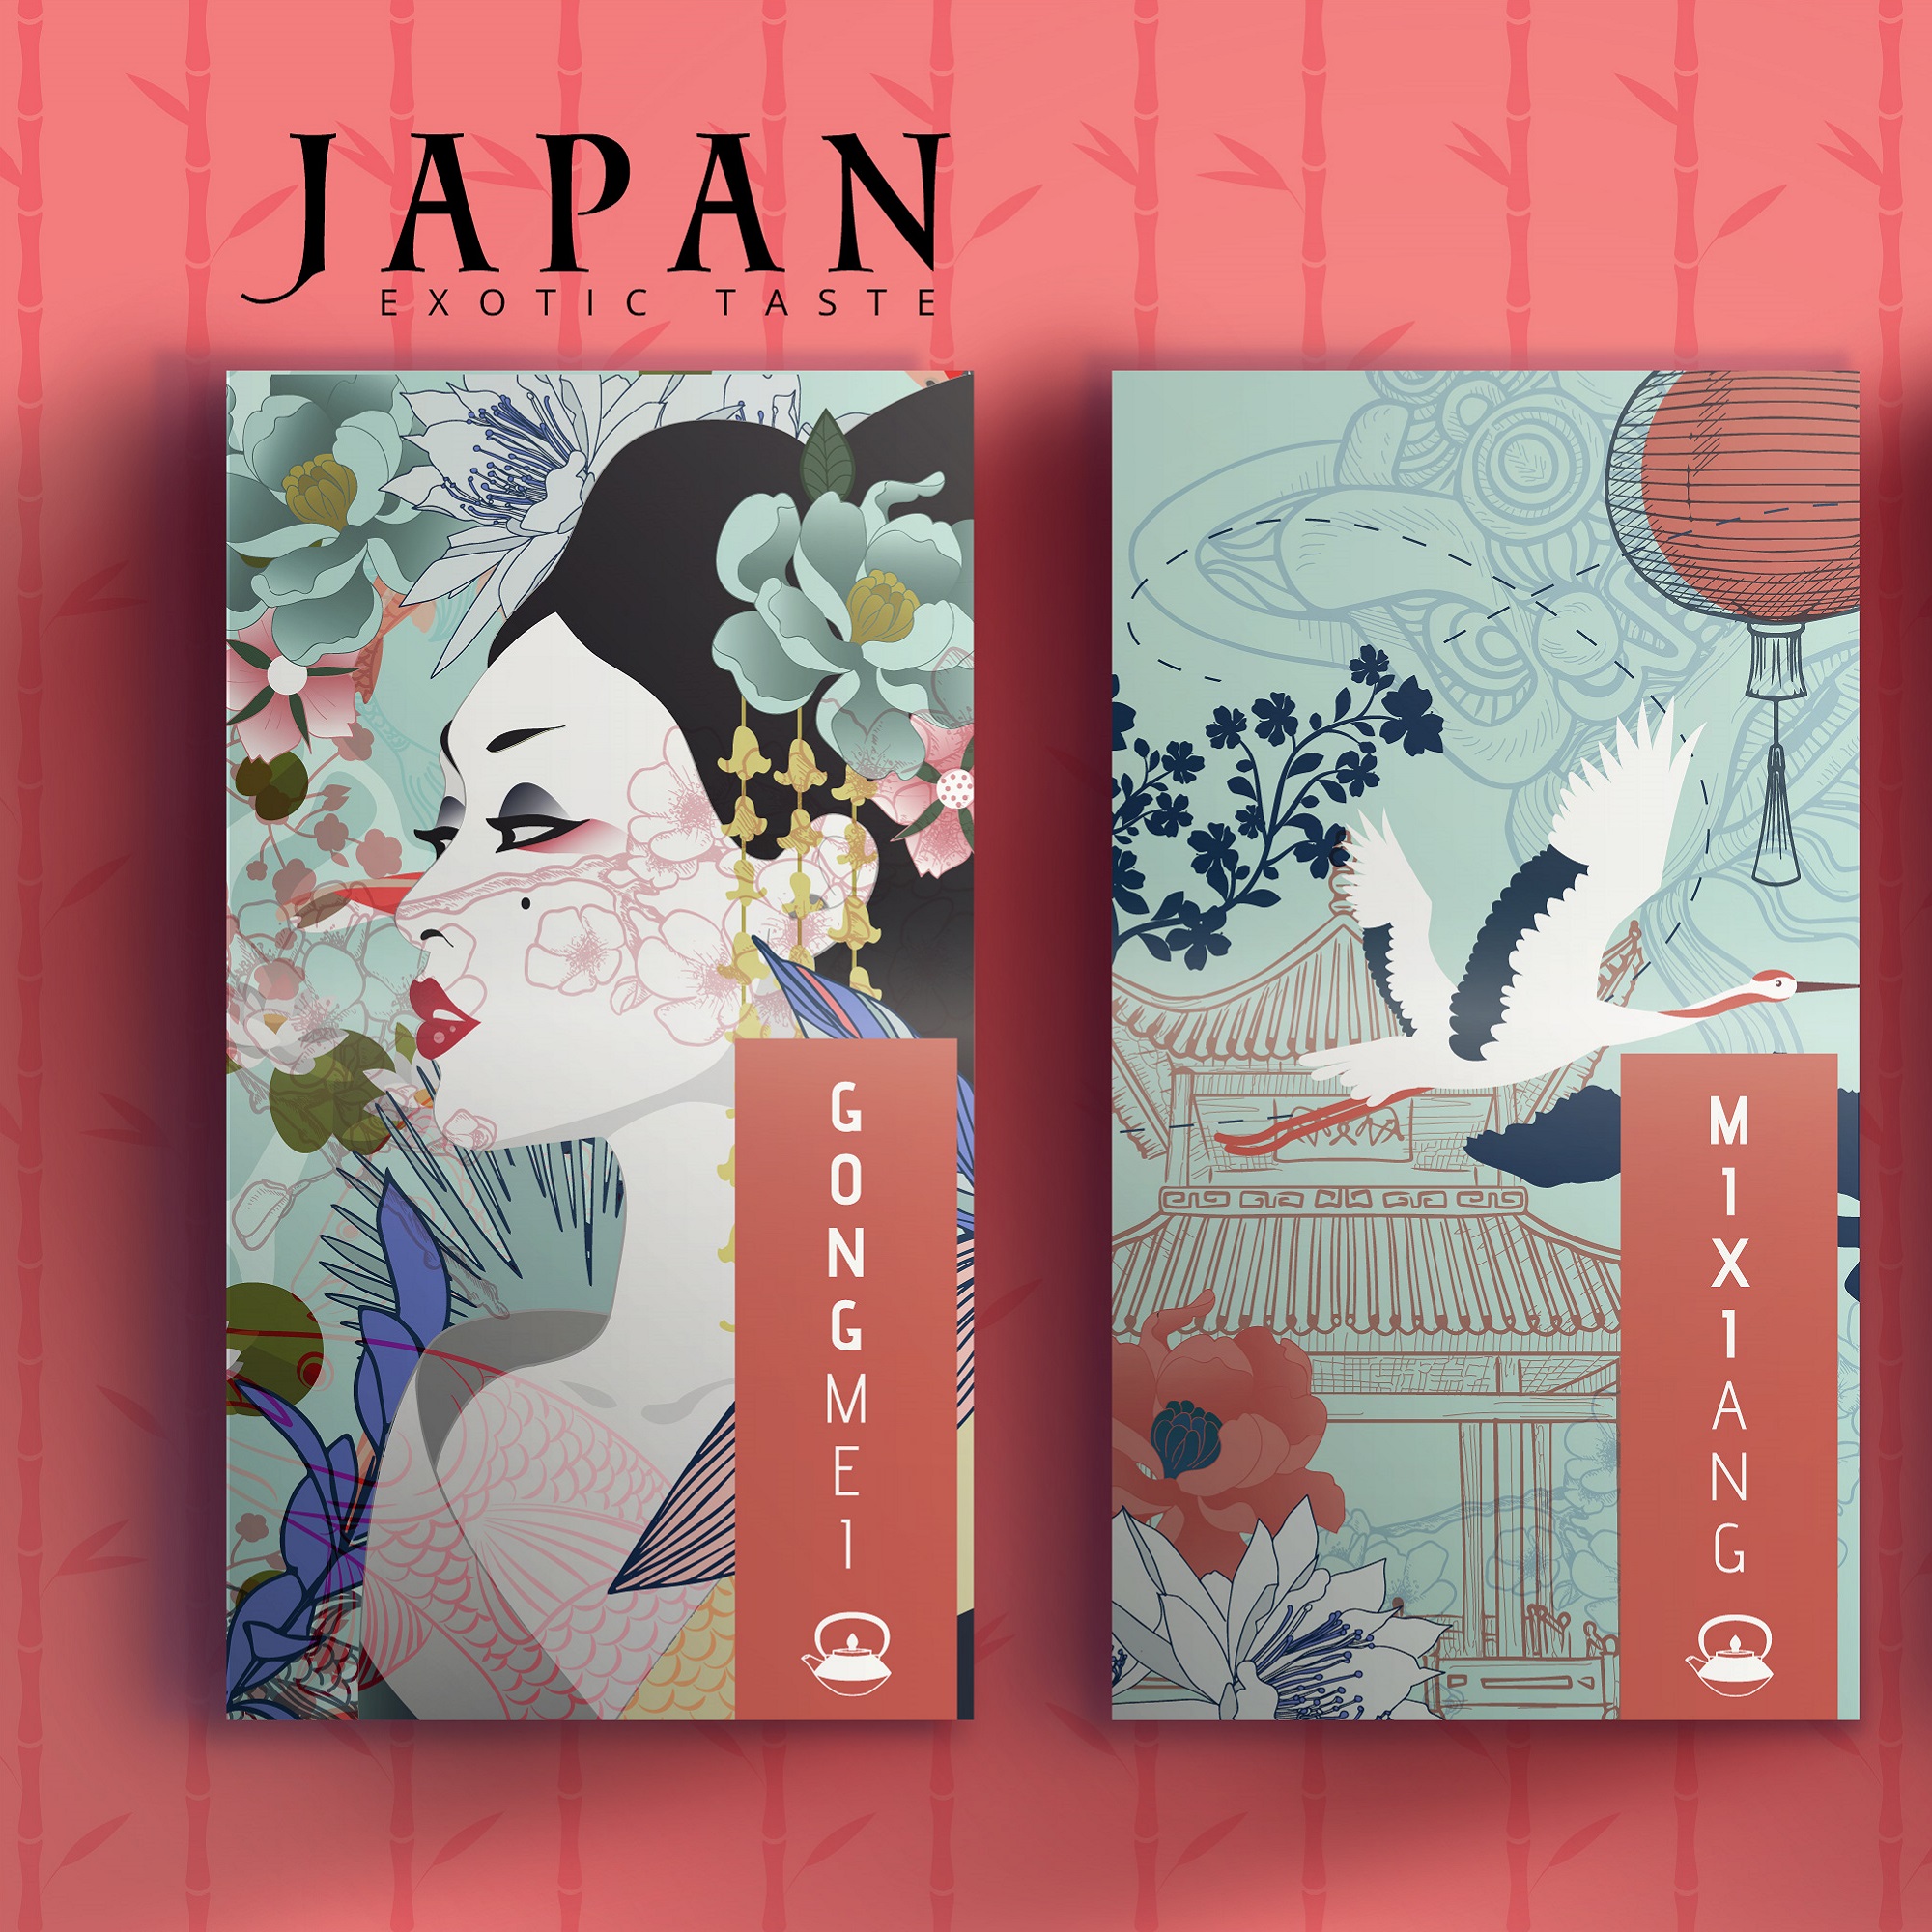 Japanese style packaging design